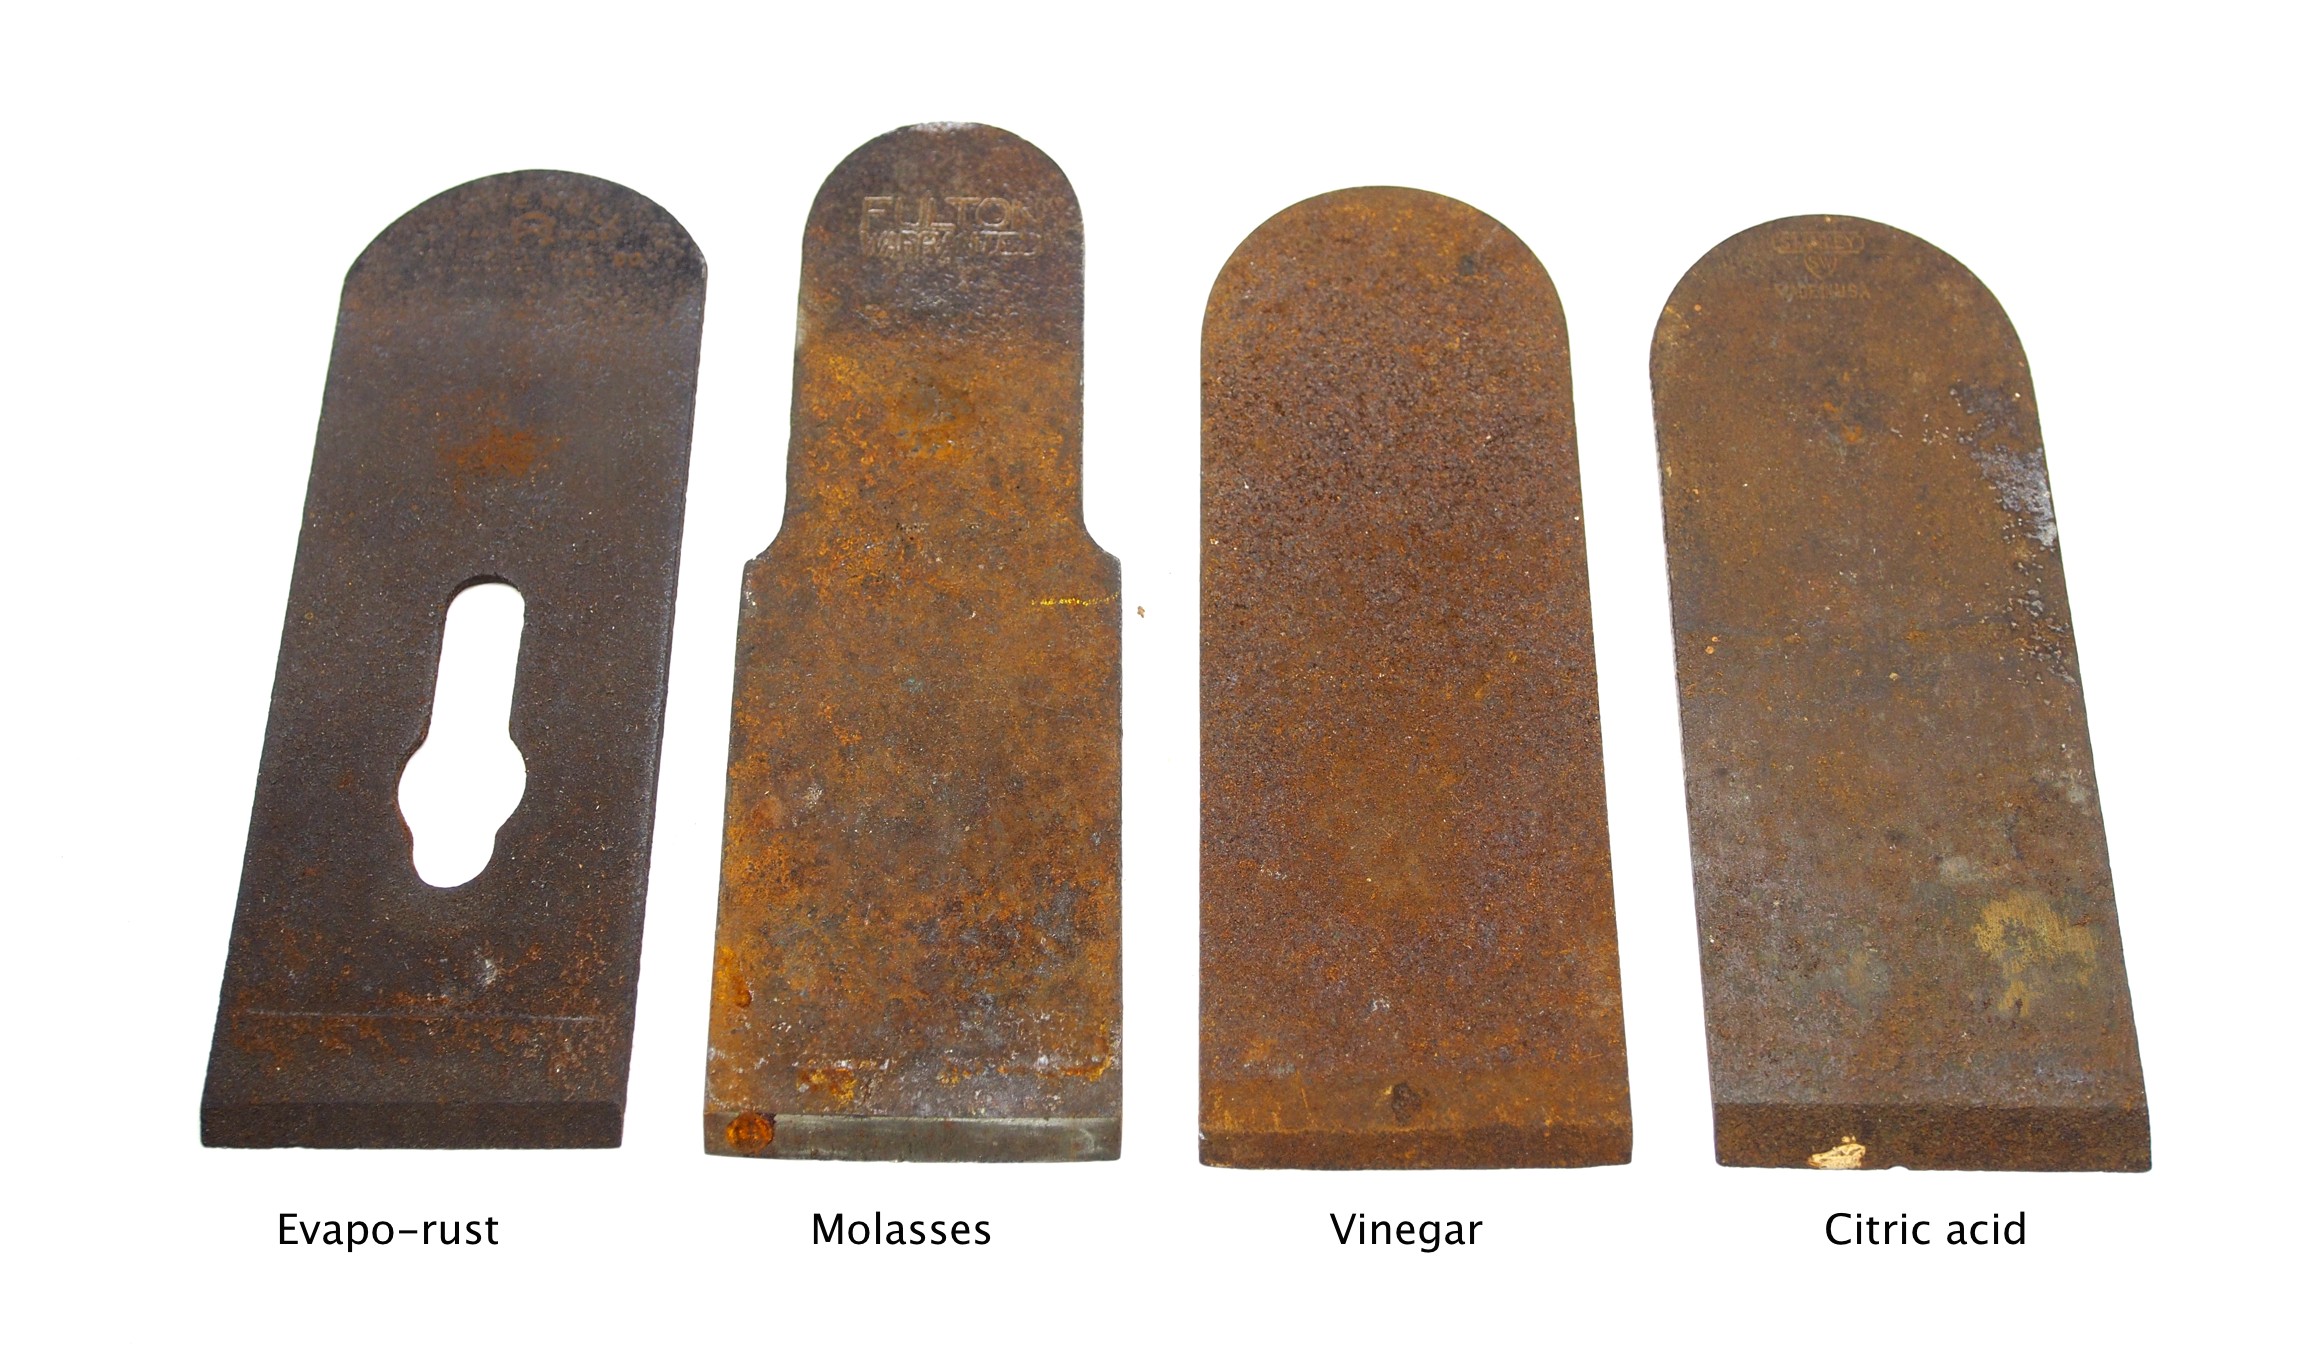 I Committed a Cast-Iron Sin And This $10 Rust Eraser Saved My